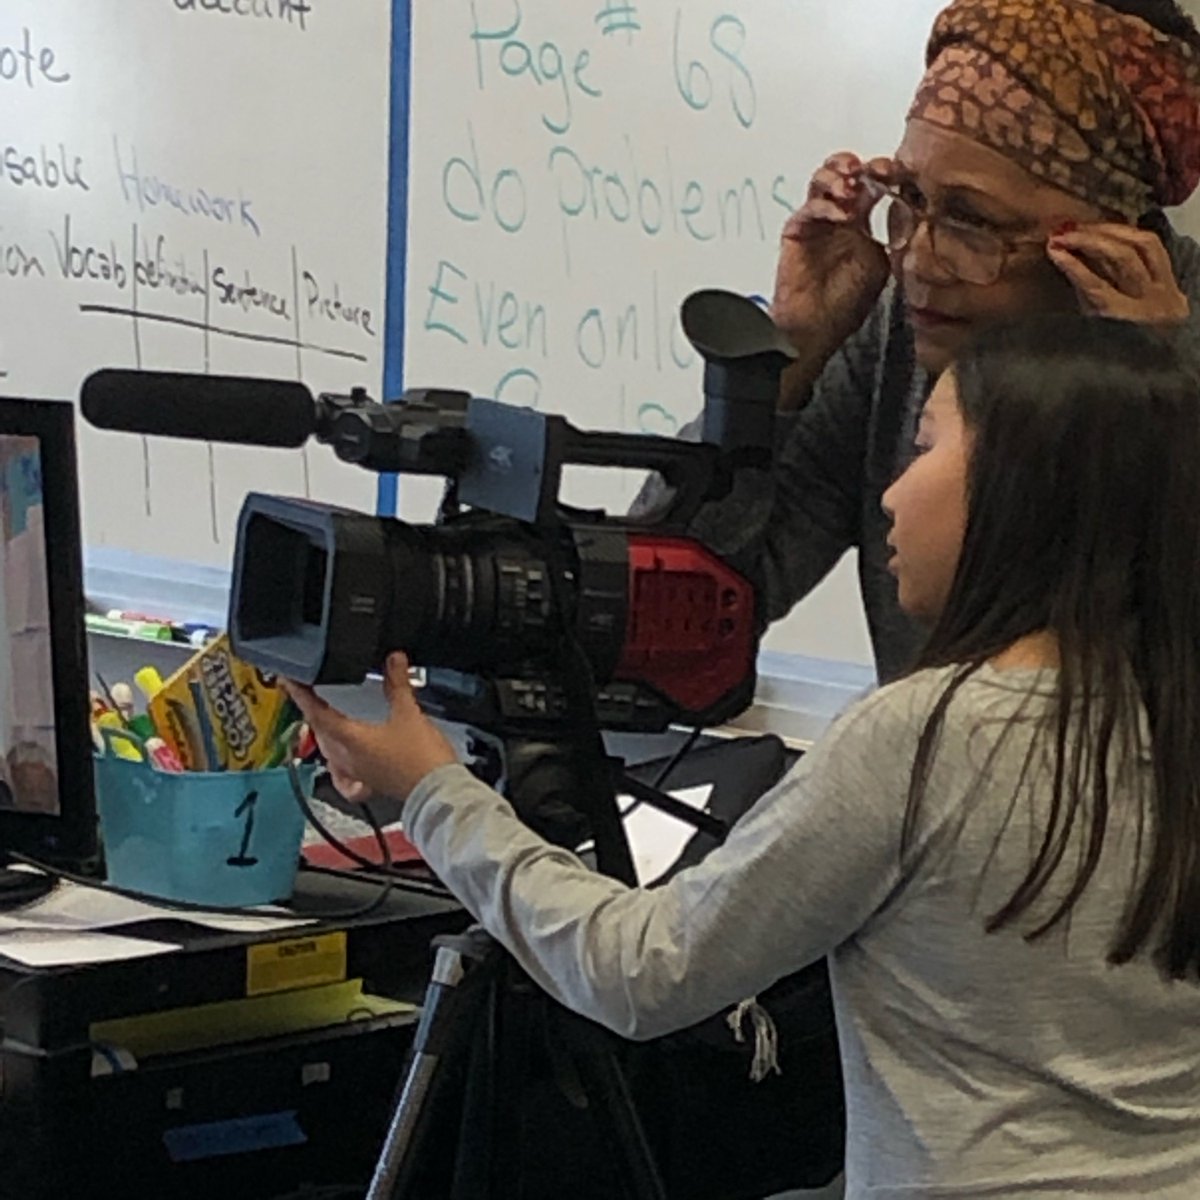 Kids N Film offers confidence building through on-camera activities and behind the scene training. kidsnfilm.com #studentfilmmakers #childactor #youthworkshops